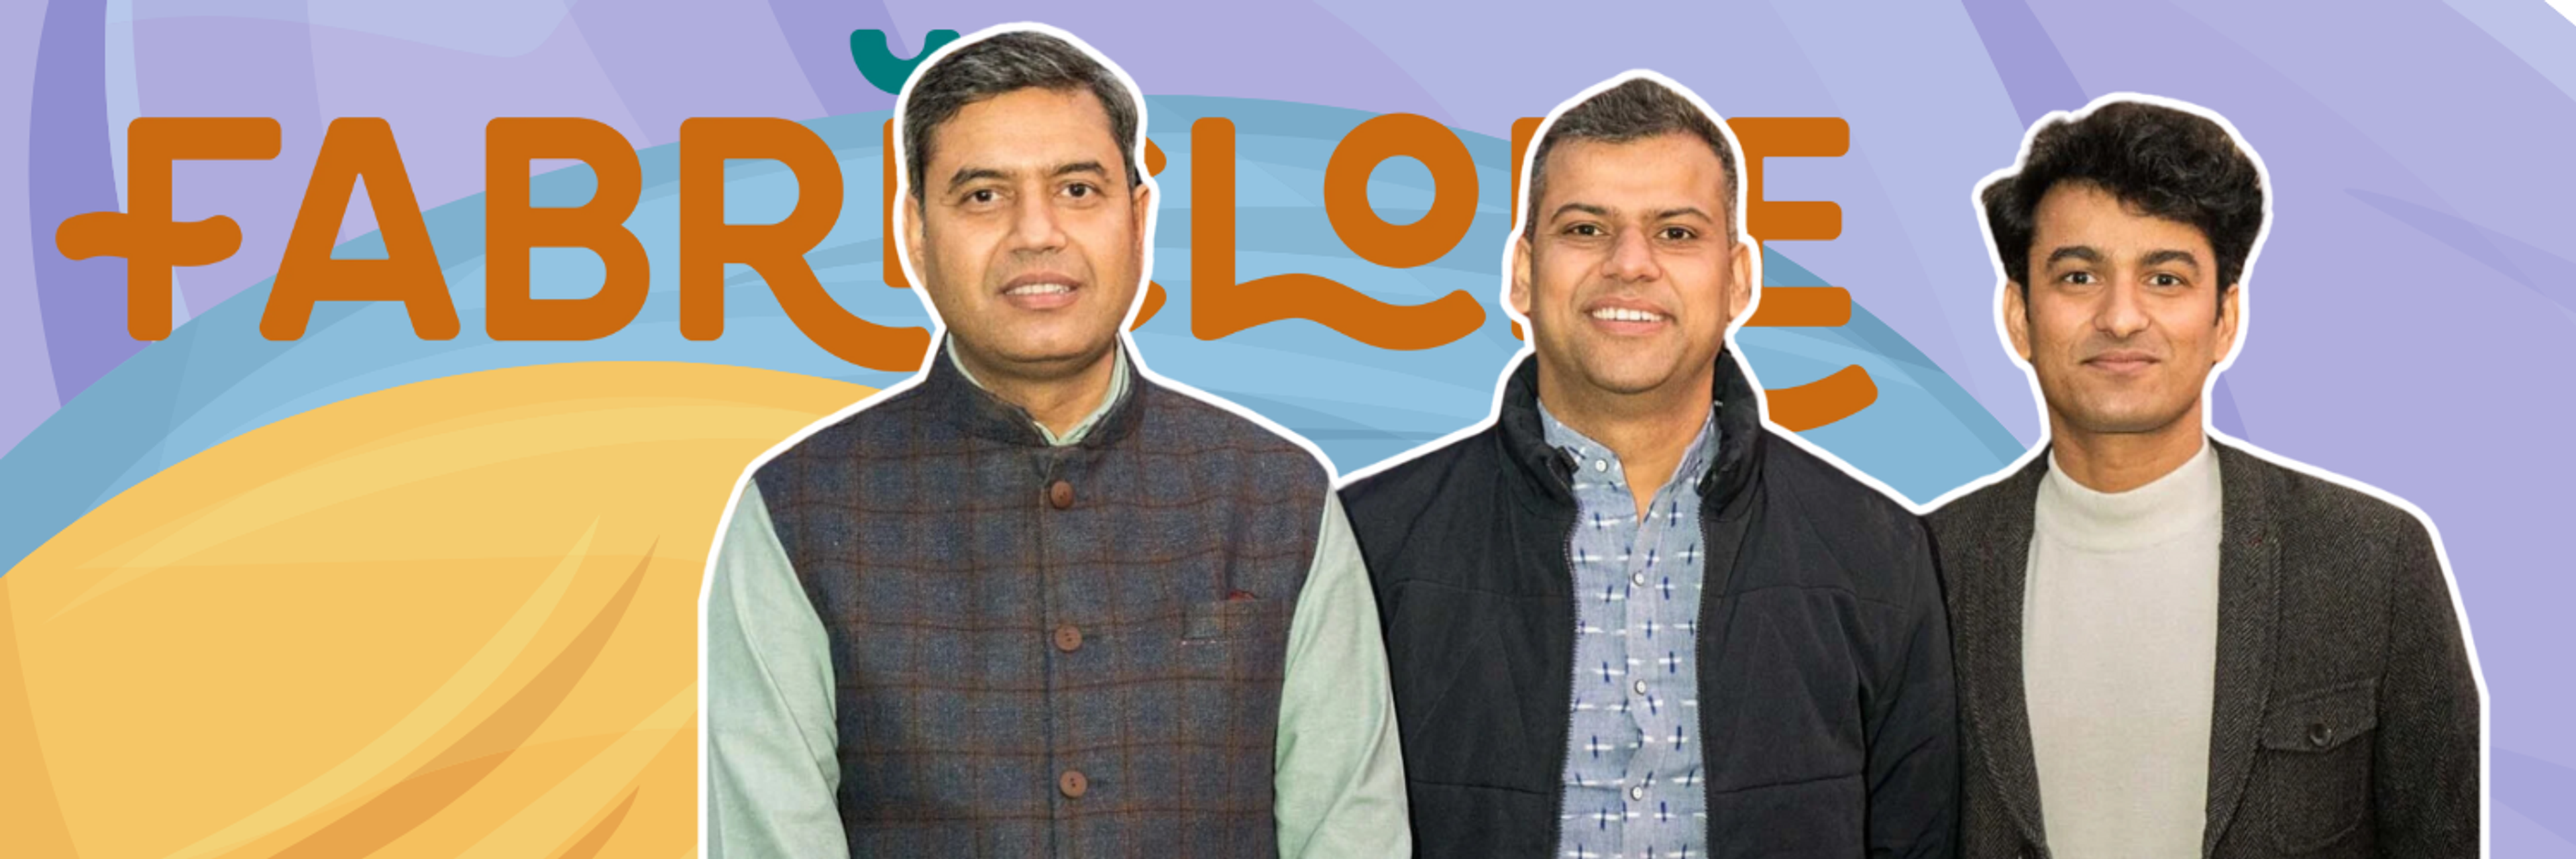 Three founders of Fabriclore, Vijay Sharma, Sandeep Sharma, and Anupam Arya, standing in front of the company's logo. The background features a colorful and abstract design, highlighting the fabric sourcing platform.